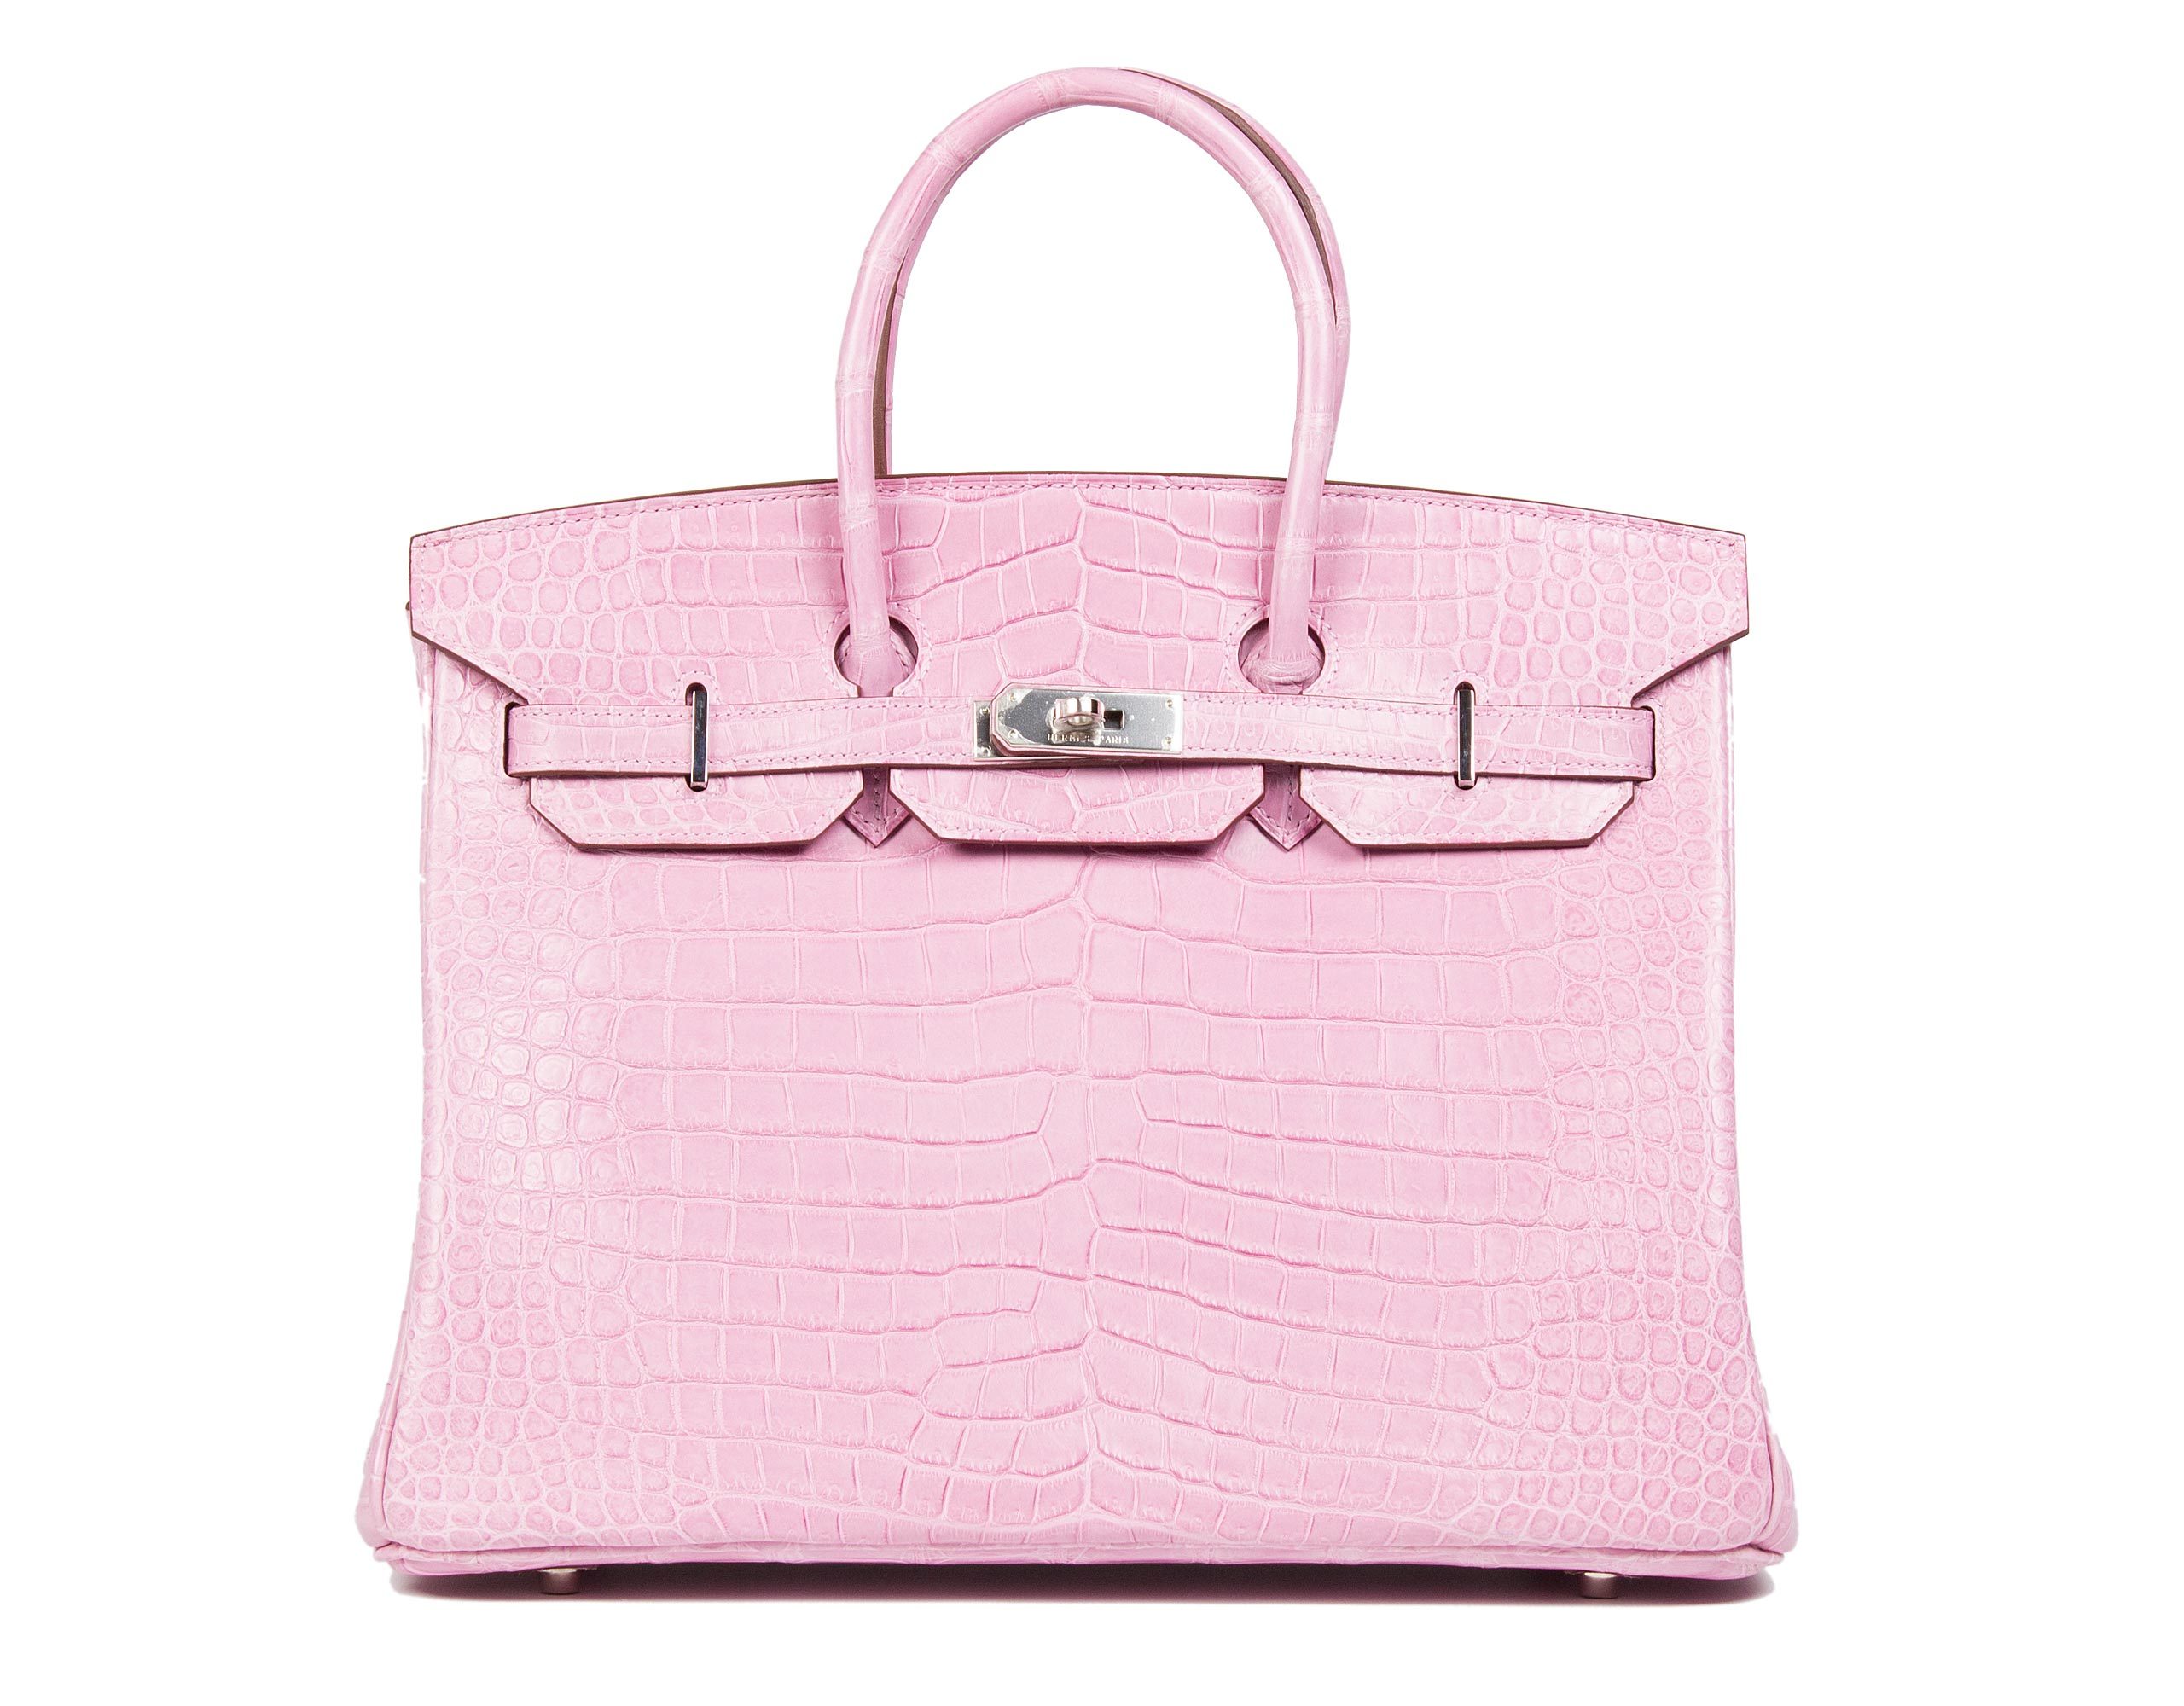 This Hermès White Crocodile Birkin Just Became the World's Most